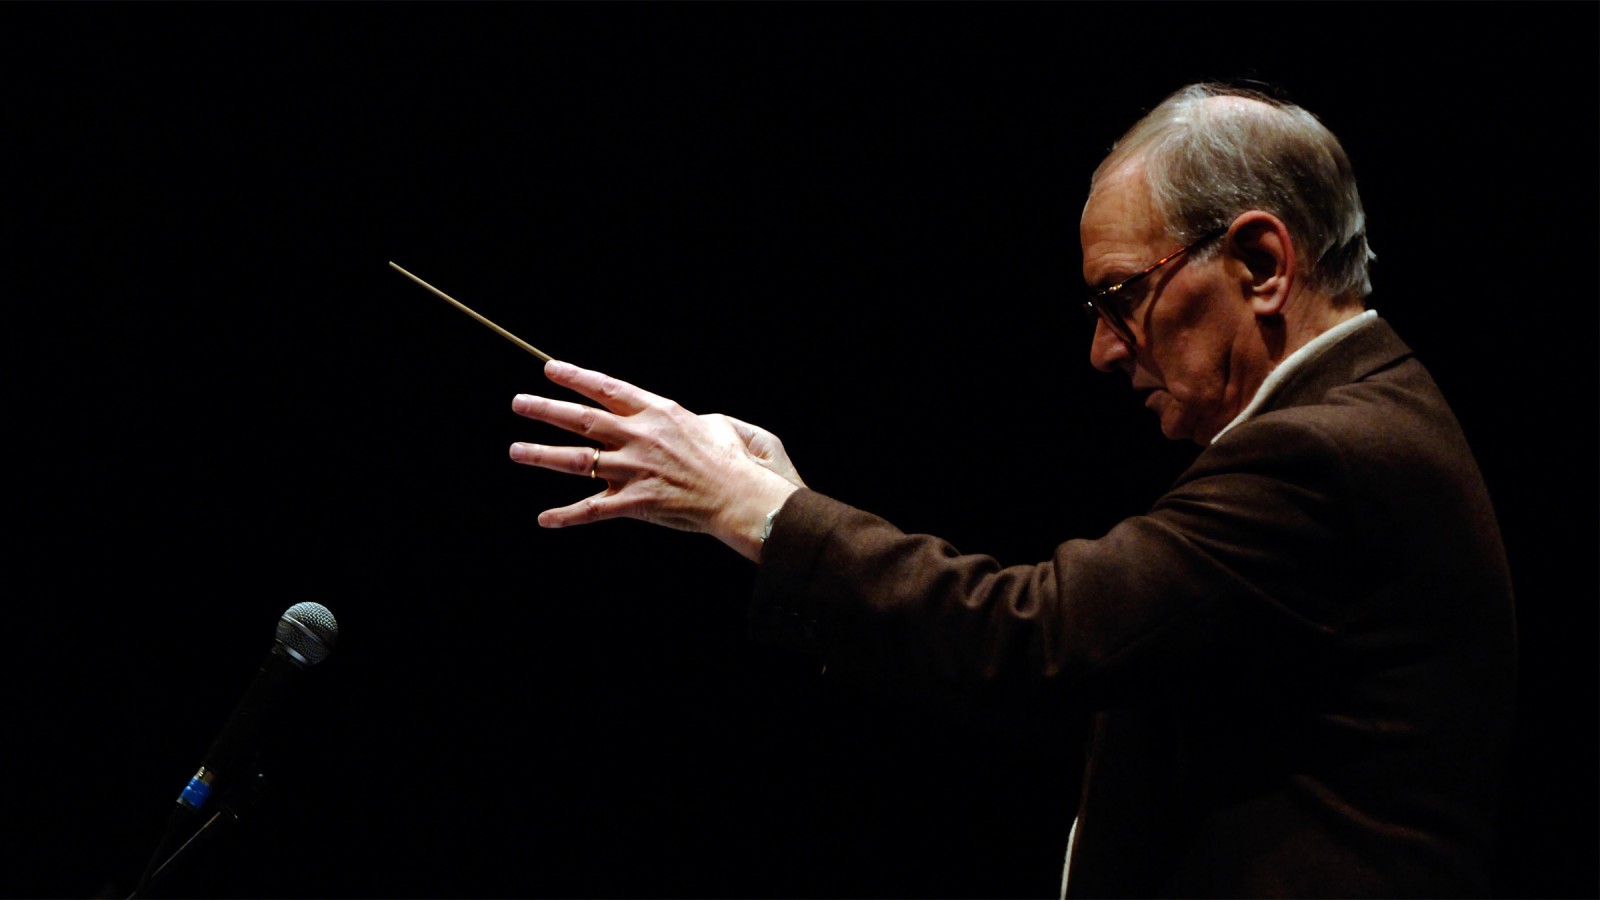 Beyond the Western: The Staggering Range of Ennio Morricone